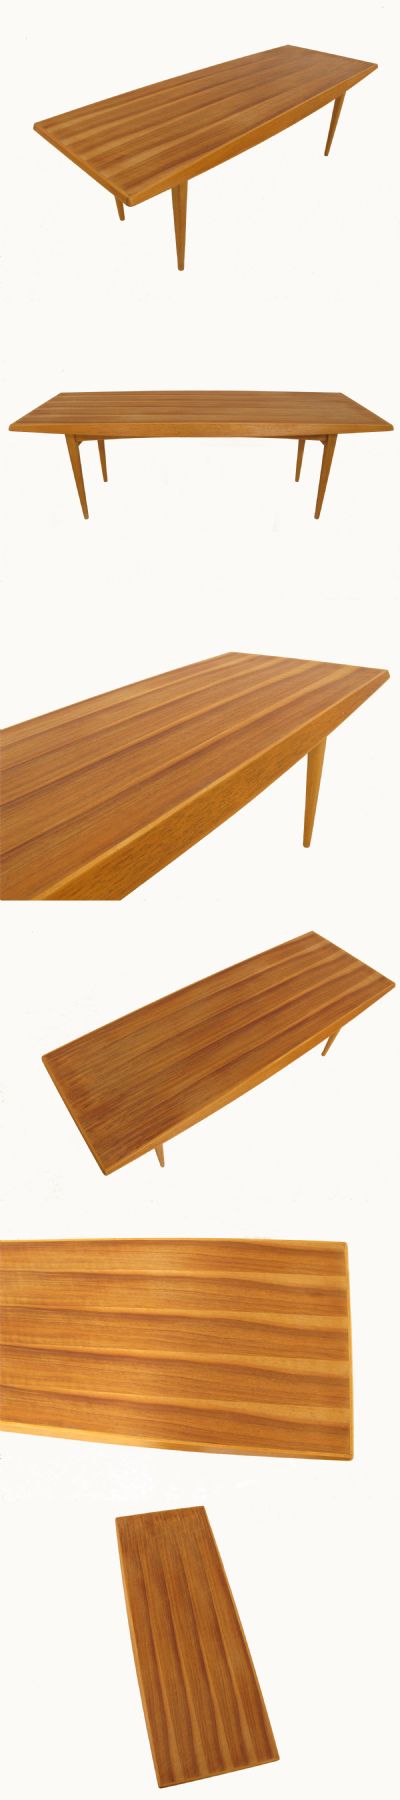 A Teak wood coffee table, c1950s. Manufactured by Gordon Russell and designed by Trevor Chinn.